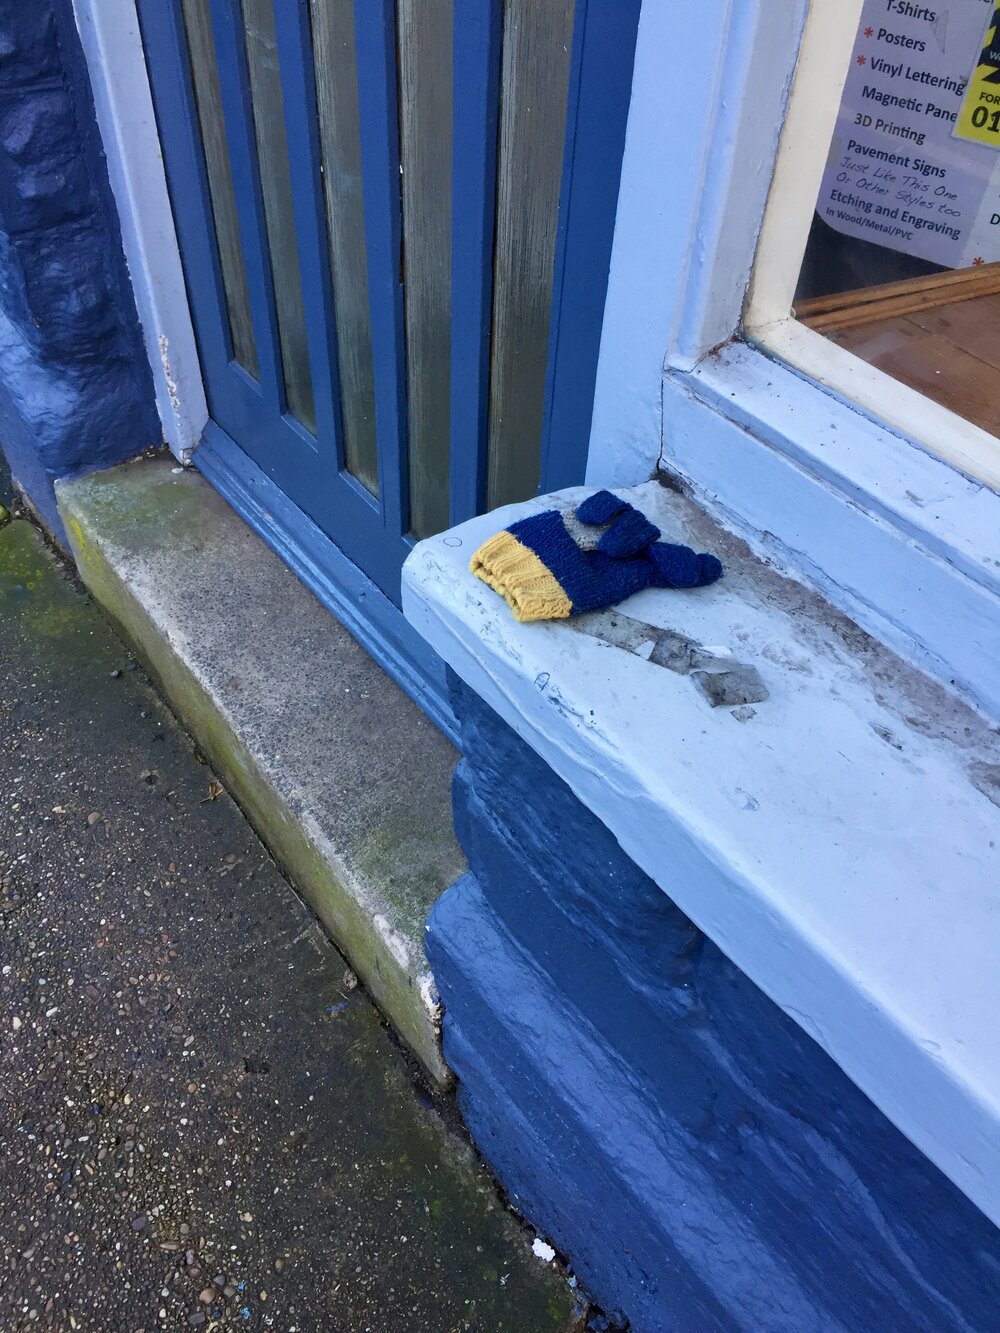  A lovely yellow and blue glove on a ledge outside a shop. 